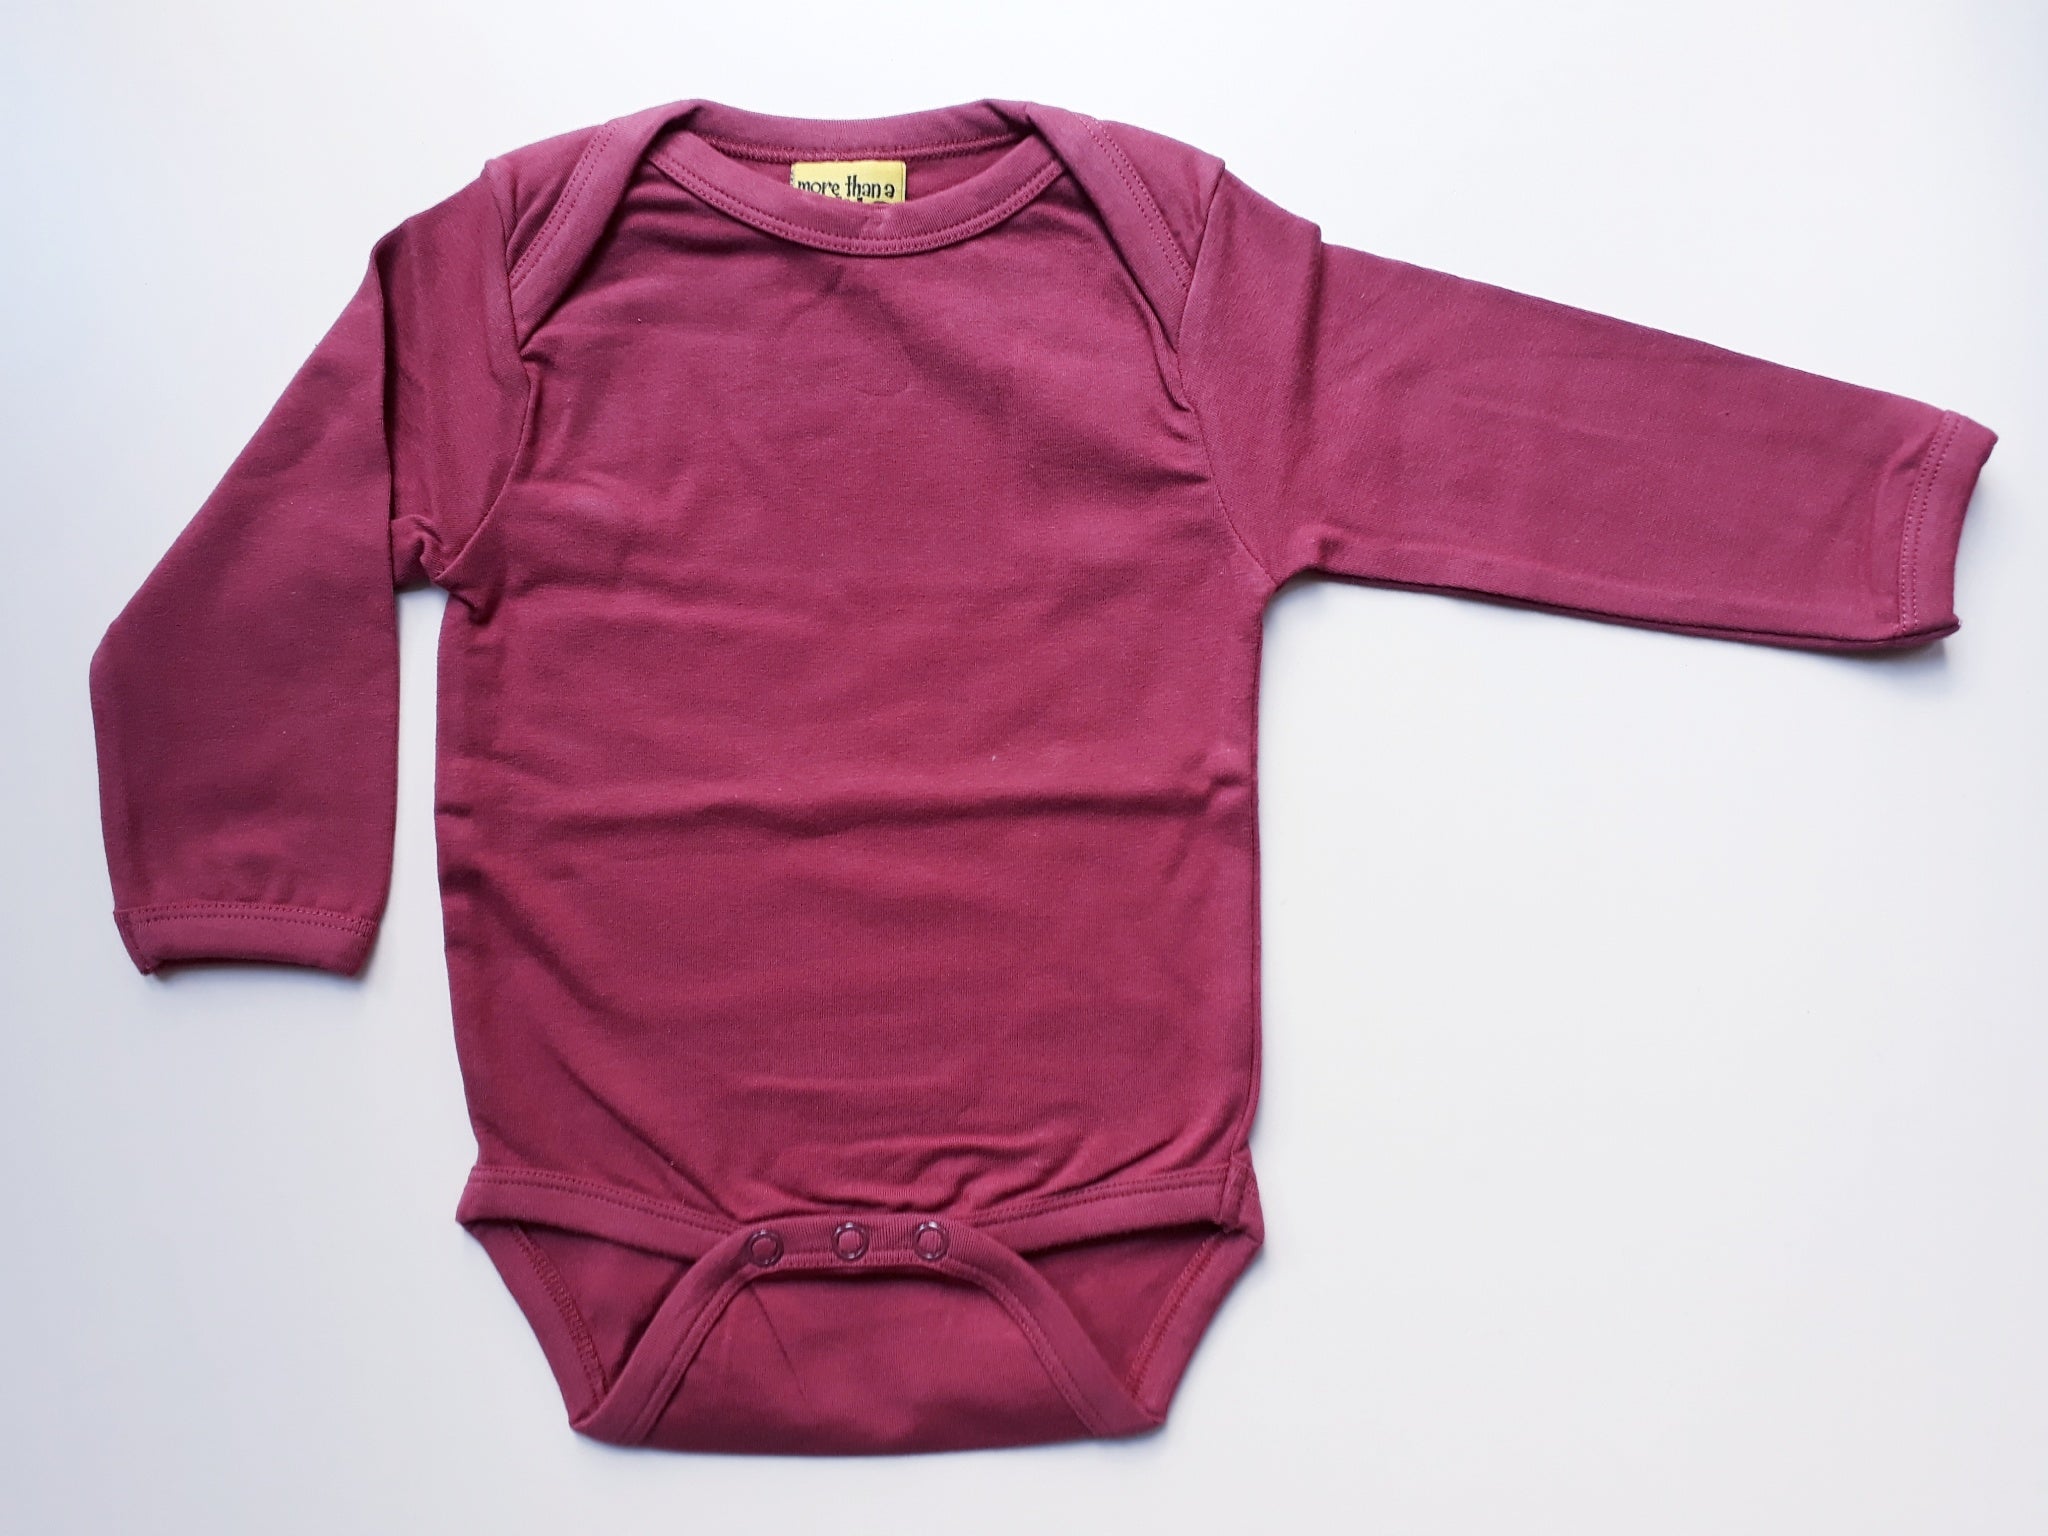 Romper Long Sleeve Body Brick Red - More Than a Fling (Duns Sweden)